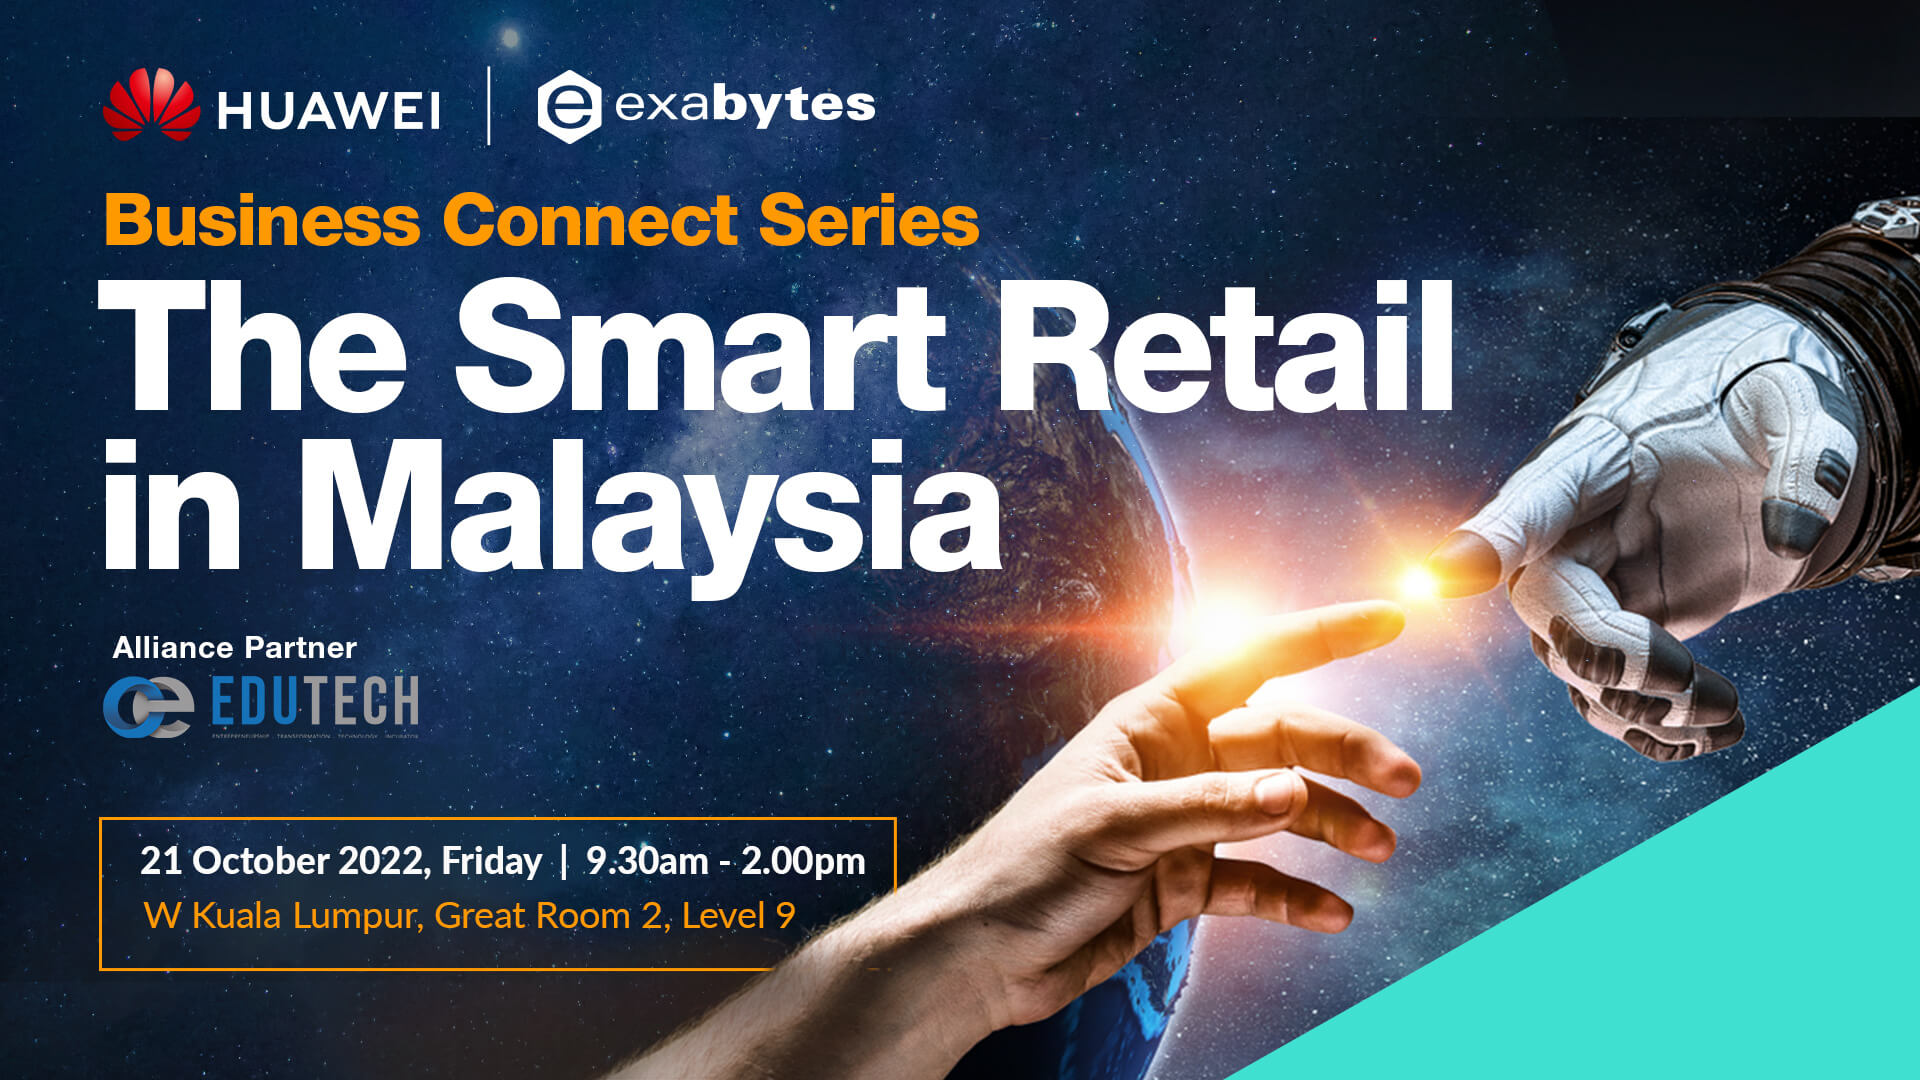 Huawei Cloud & Exabytes - Business Connect Series - The Smart Retail in Malaysia